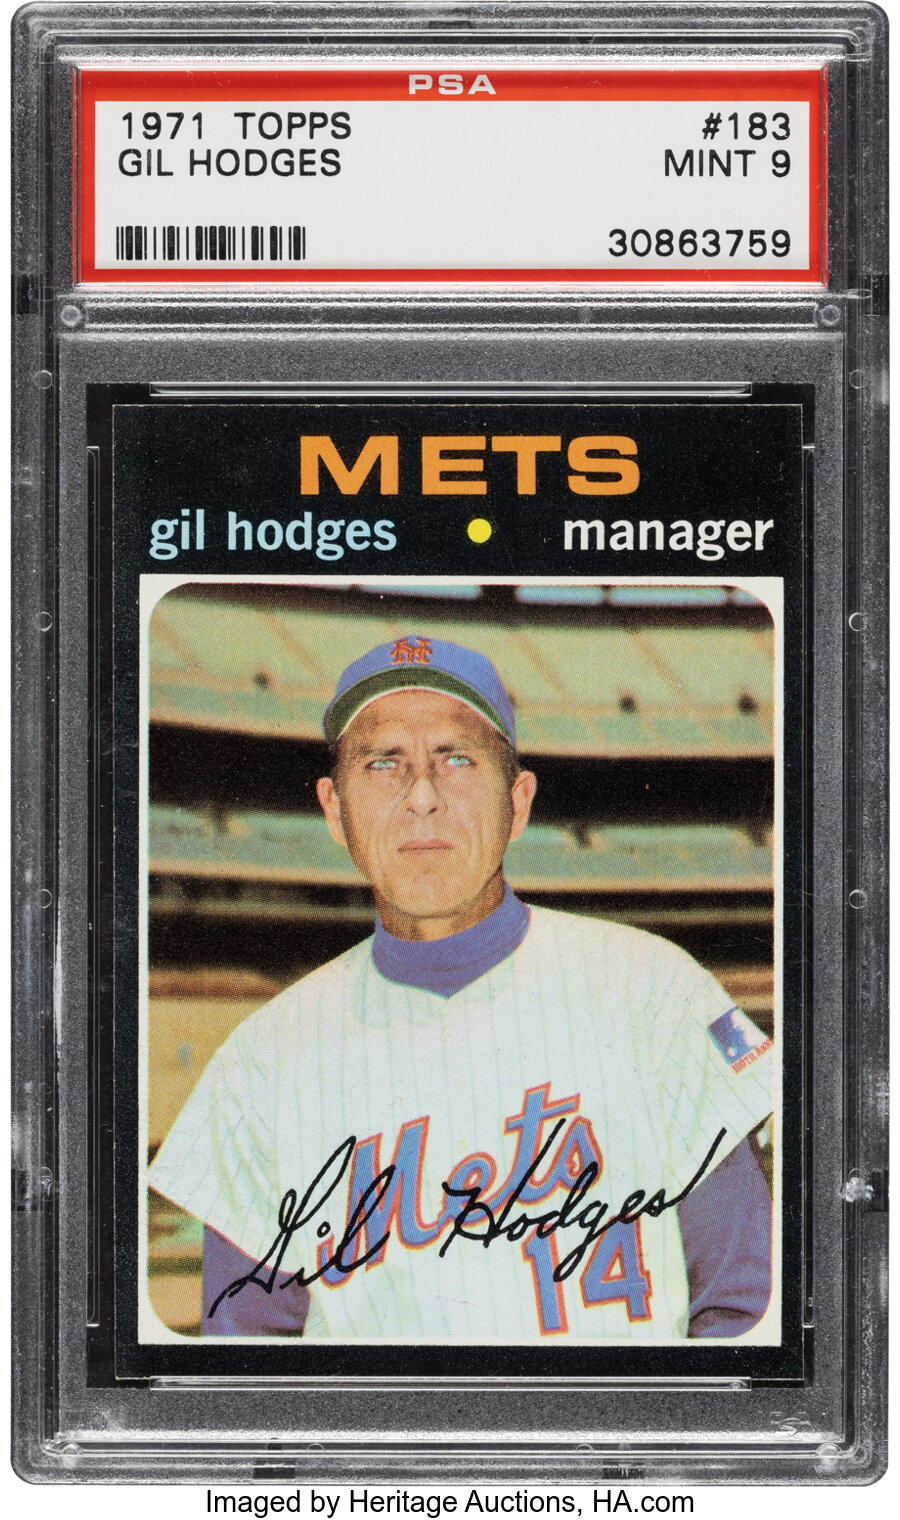 1971 Topps Gil Hodges #183 PSA Mint 9 - Only One Higher!